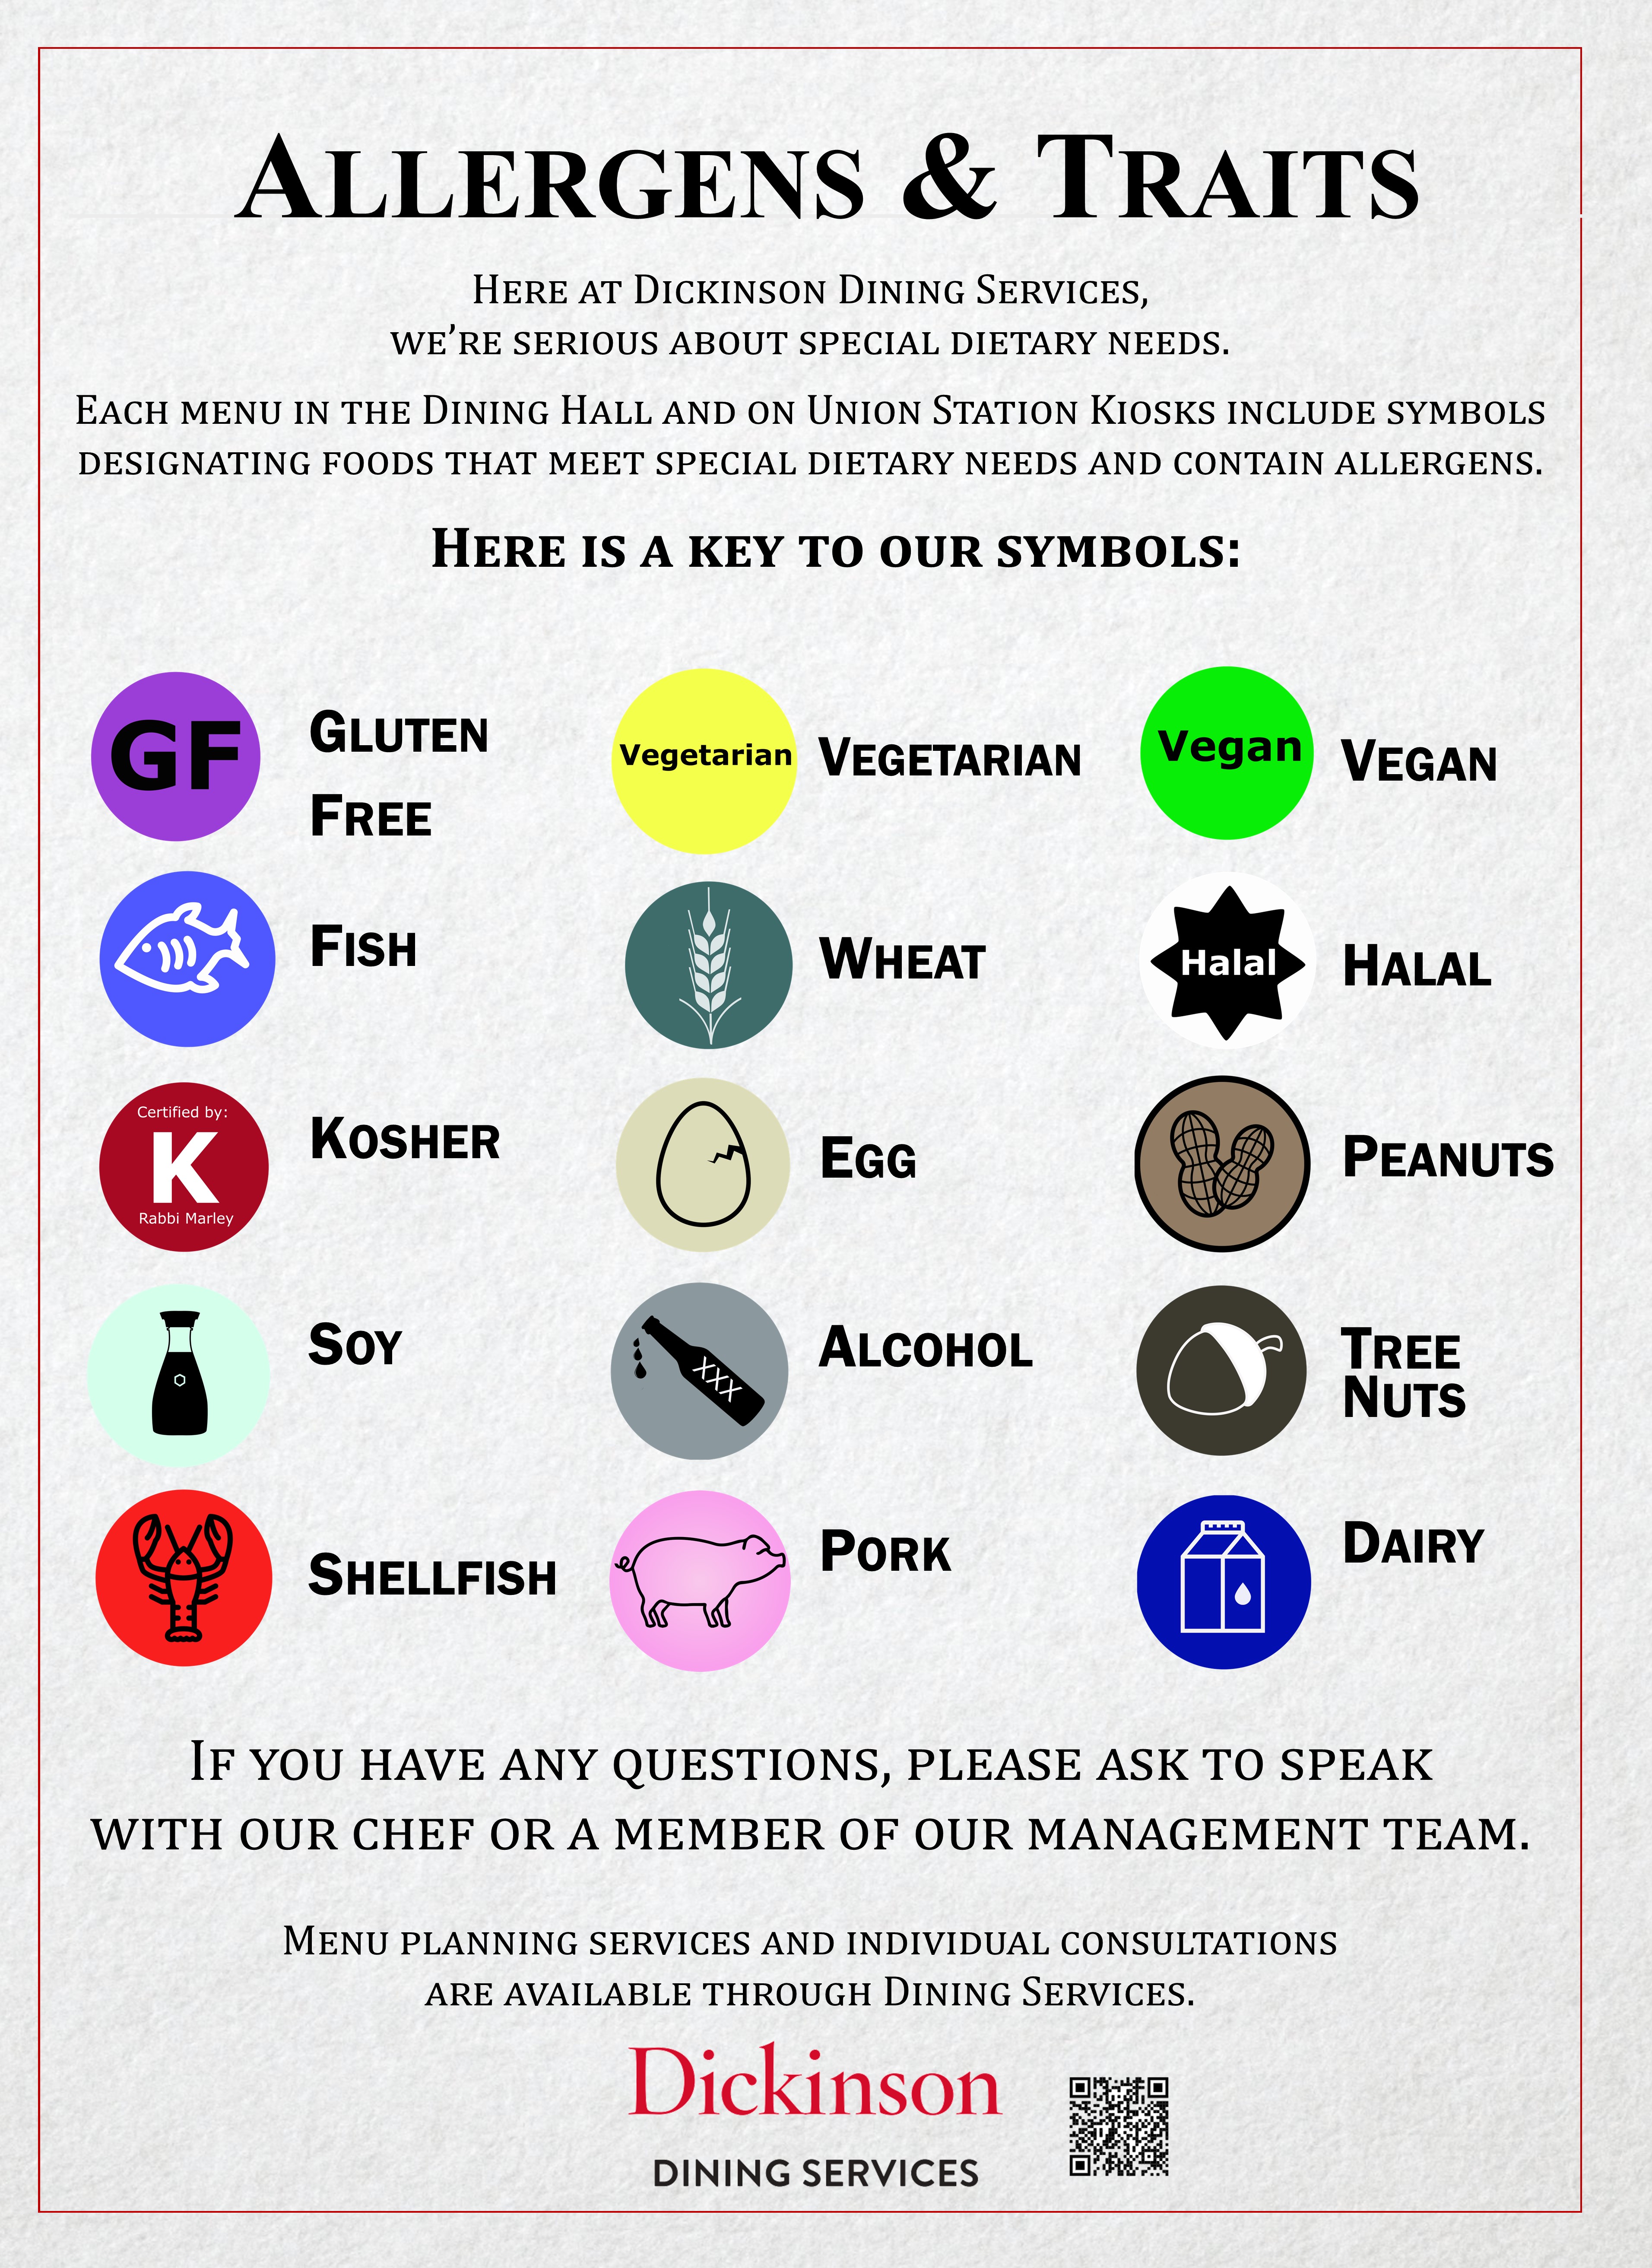 A picture of Dickinson Dining's Allergen symbols